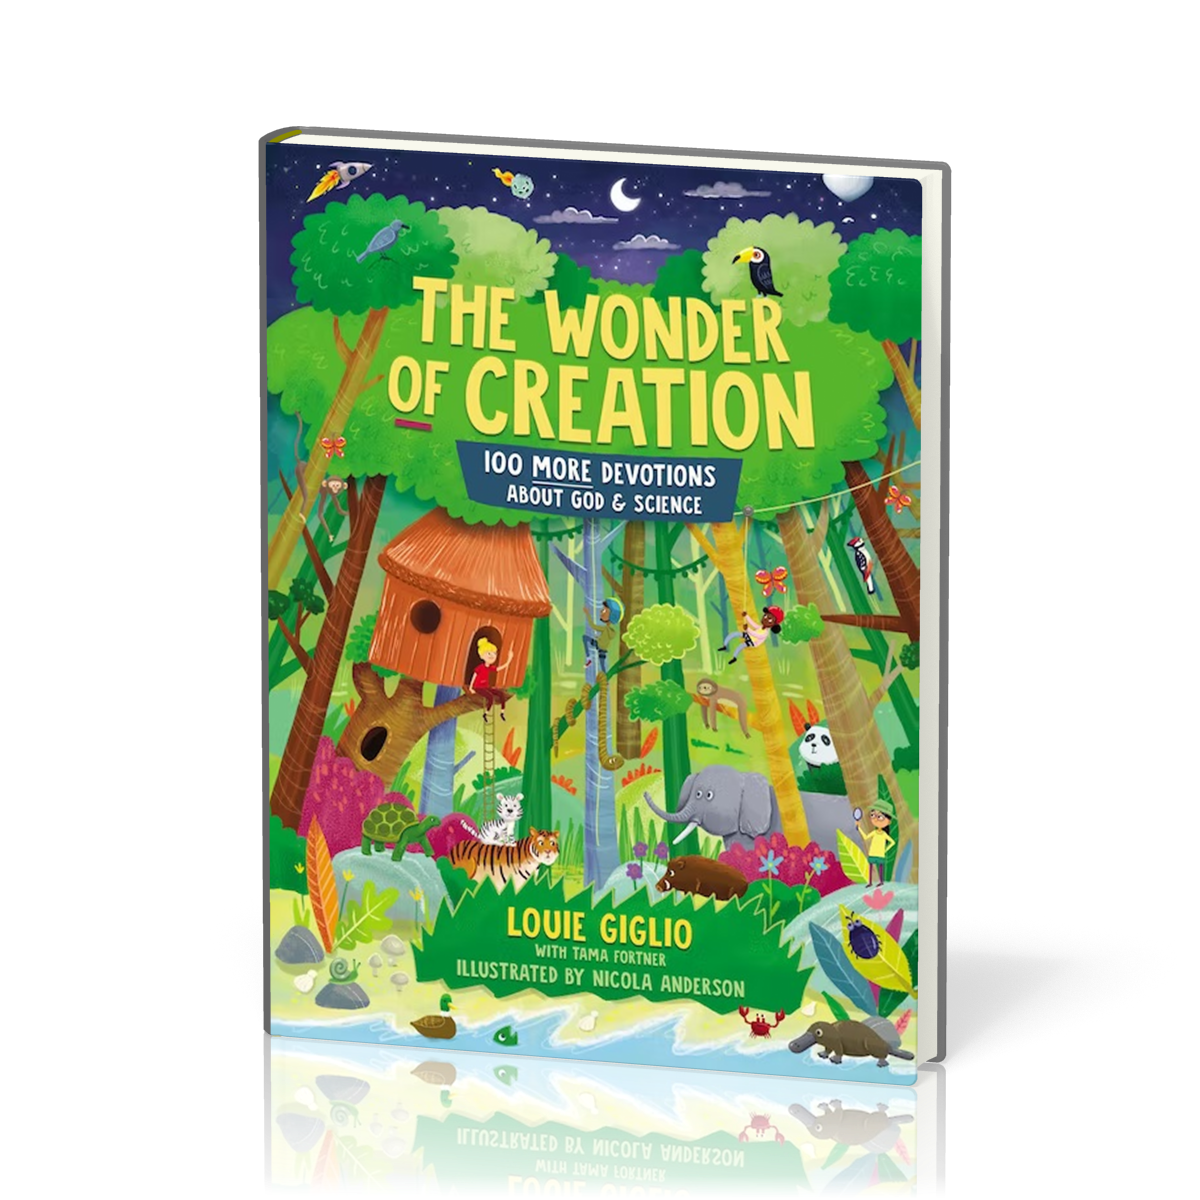 Wonder of Creation (The) - 100 More Devotions About God & Science